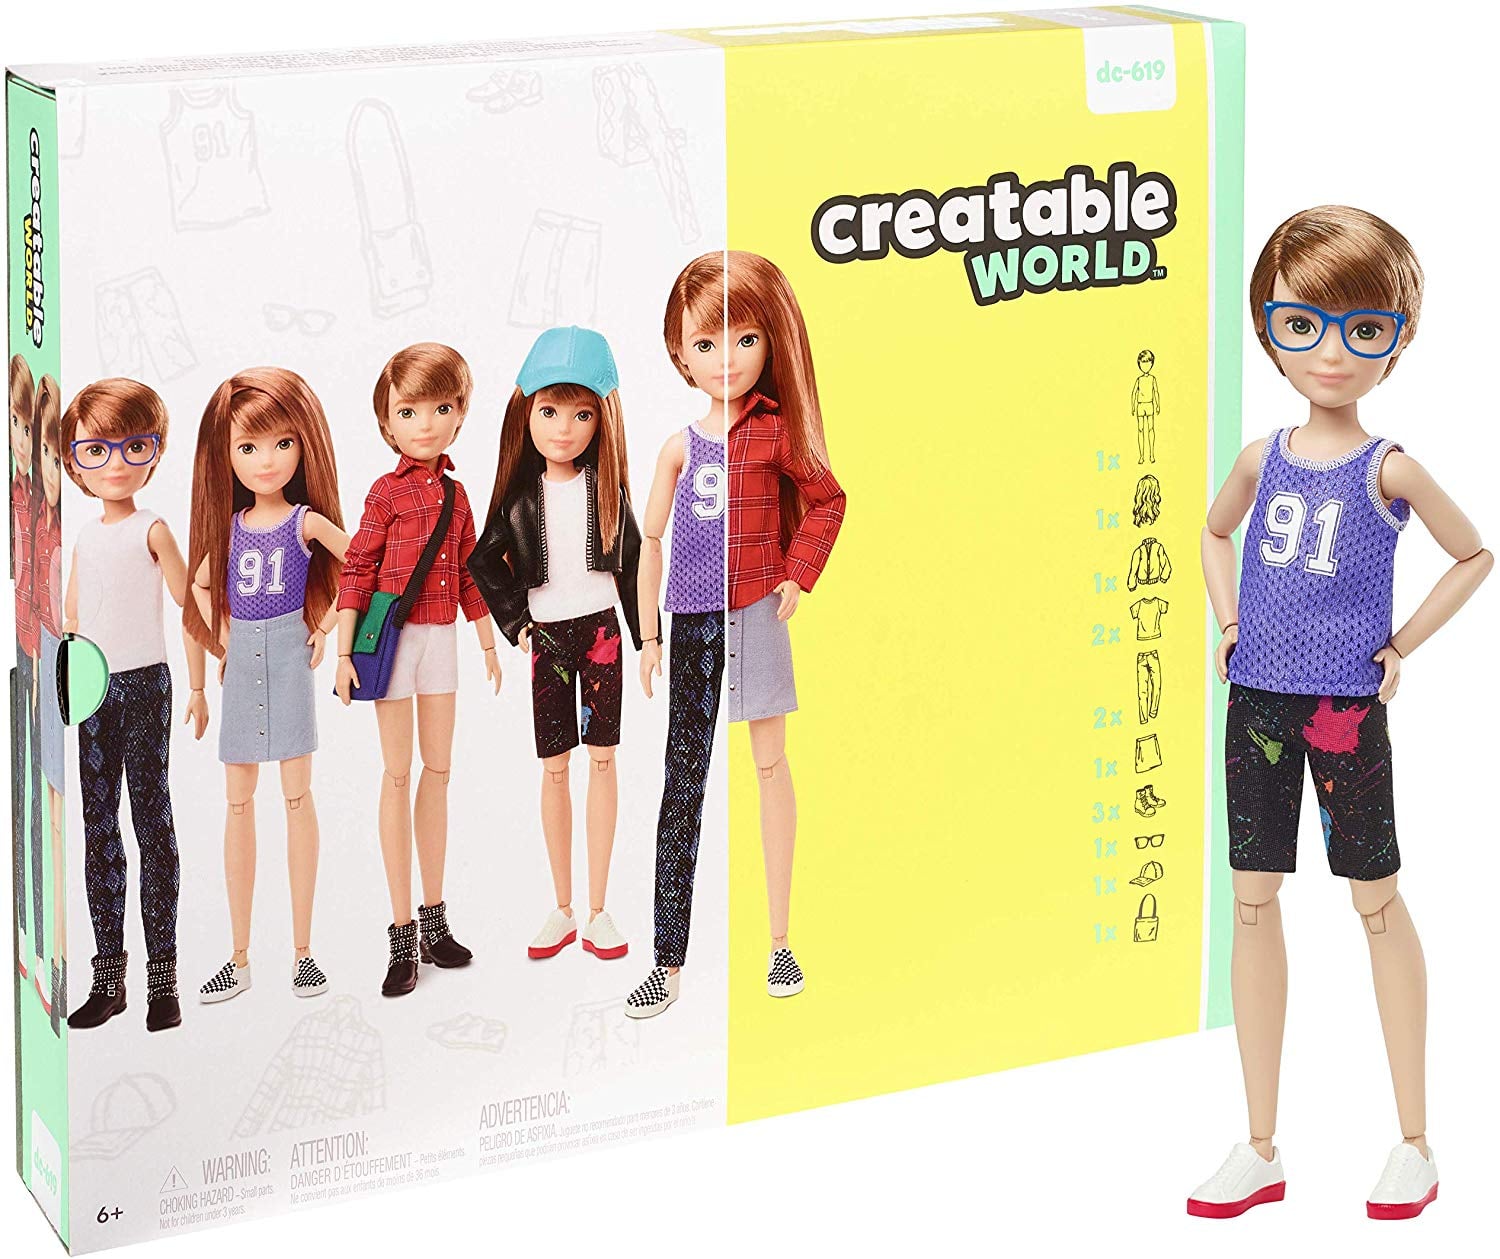 Mattel Creatable World: Gender-Neutral Doll Line From Barbie Makers  Released in Walmart and Target